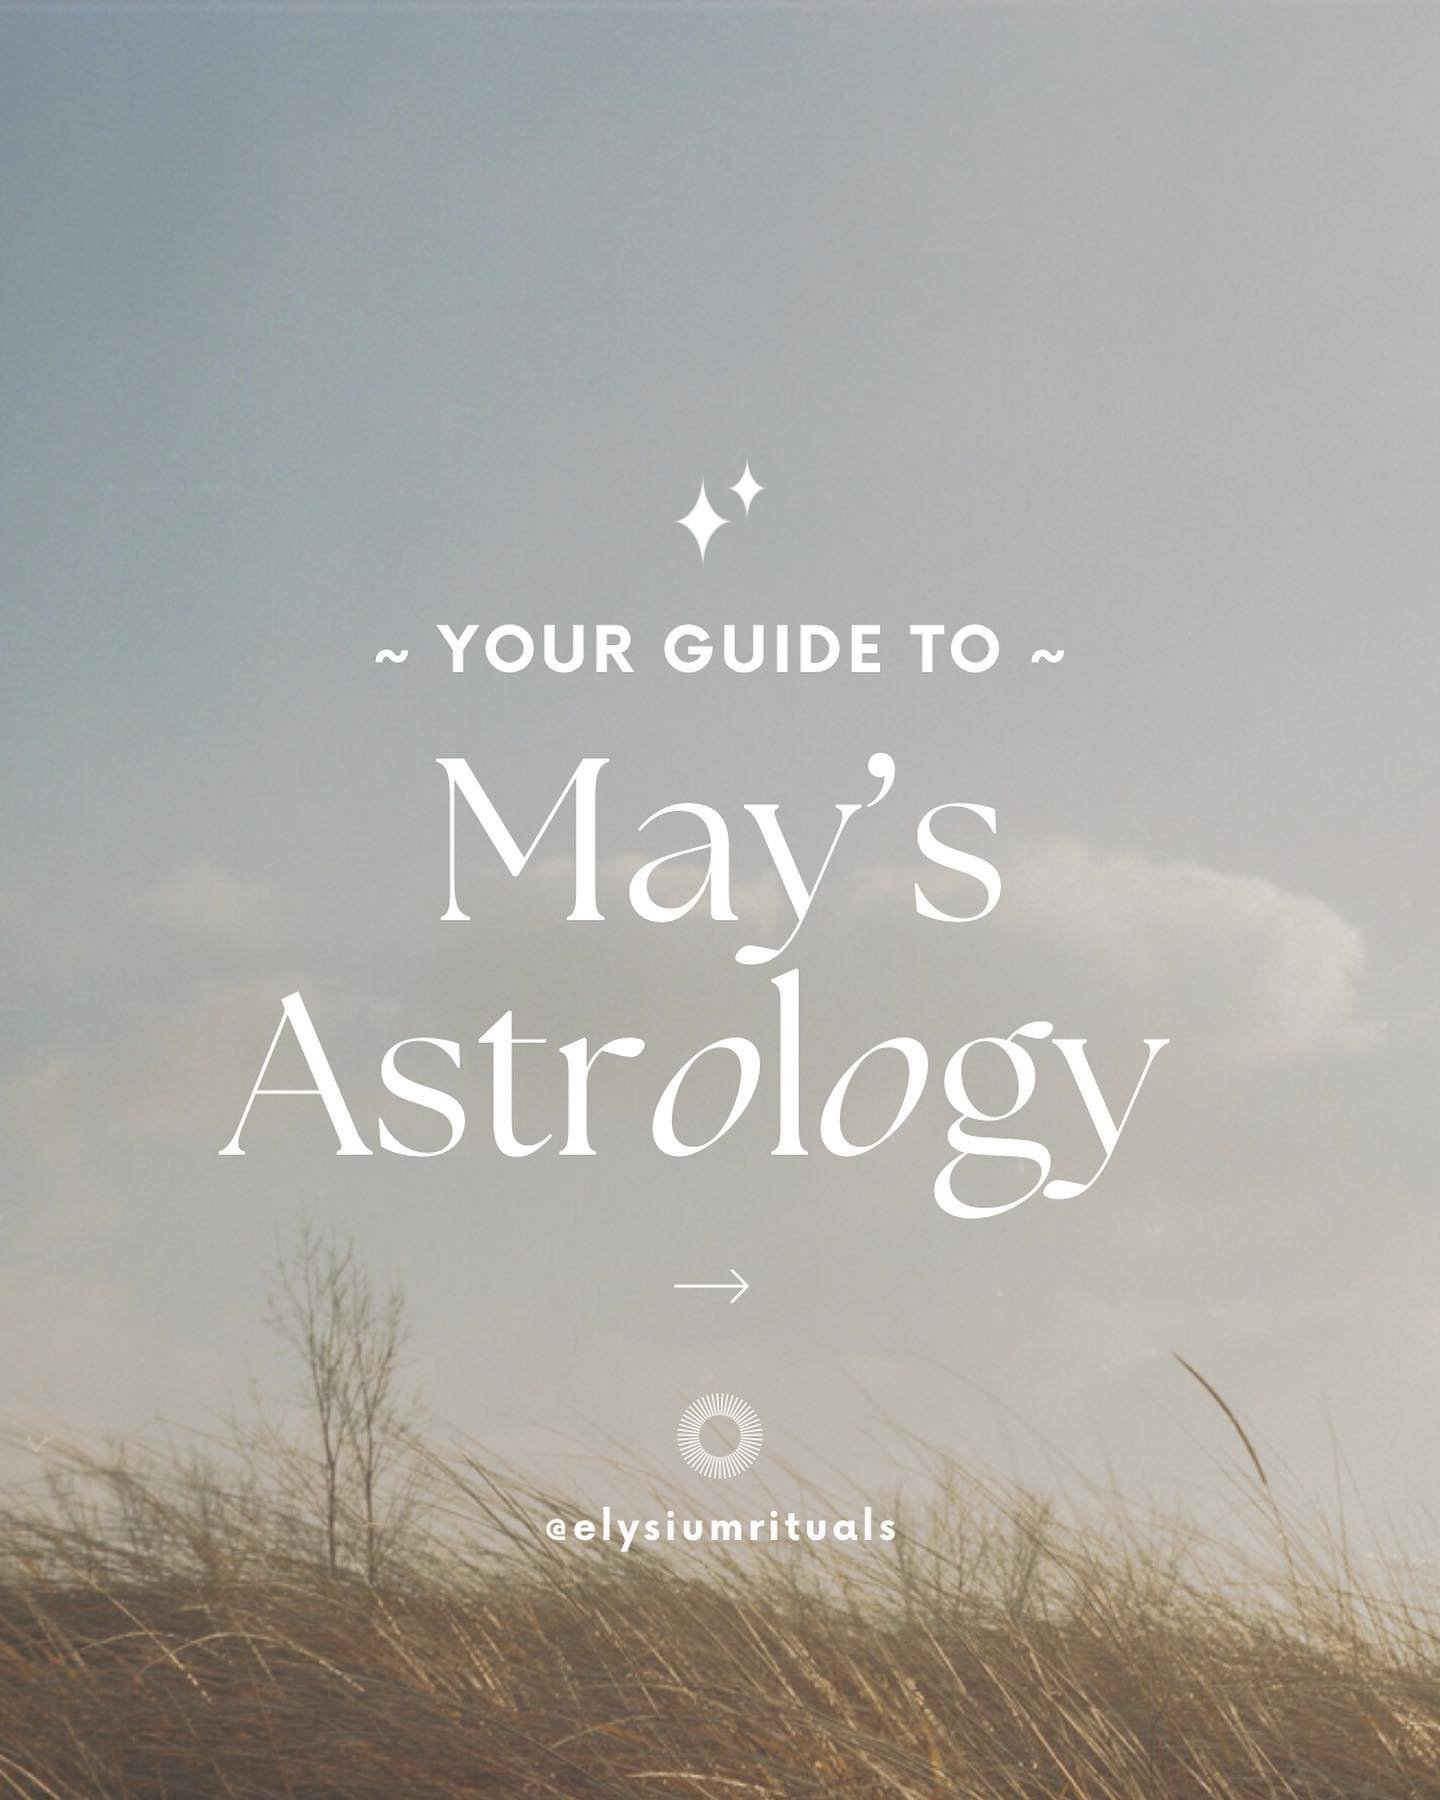 MAY ASTRO FORECAST:

Overall this appears to be a more grounded month than the rollercoaster of April. With the Sun and Venus both in Taurus for the first 3 weeks, Mercury joining them mid-month, there is plenty of resources to nourish into 🌱

We ha